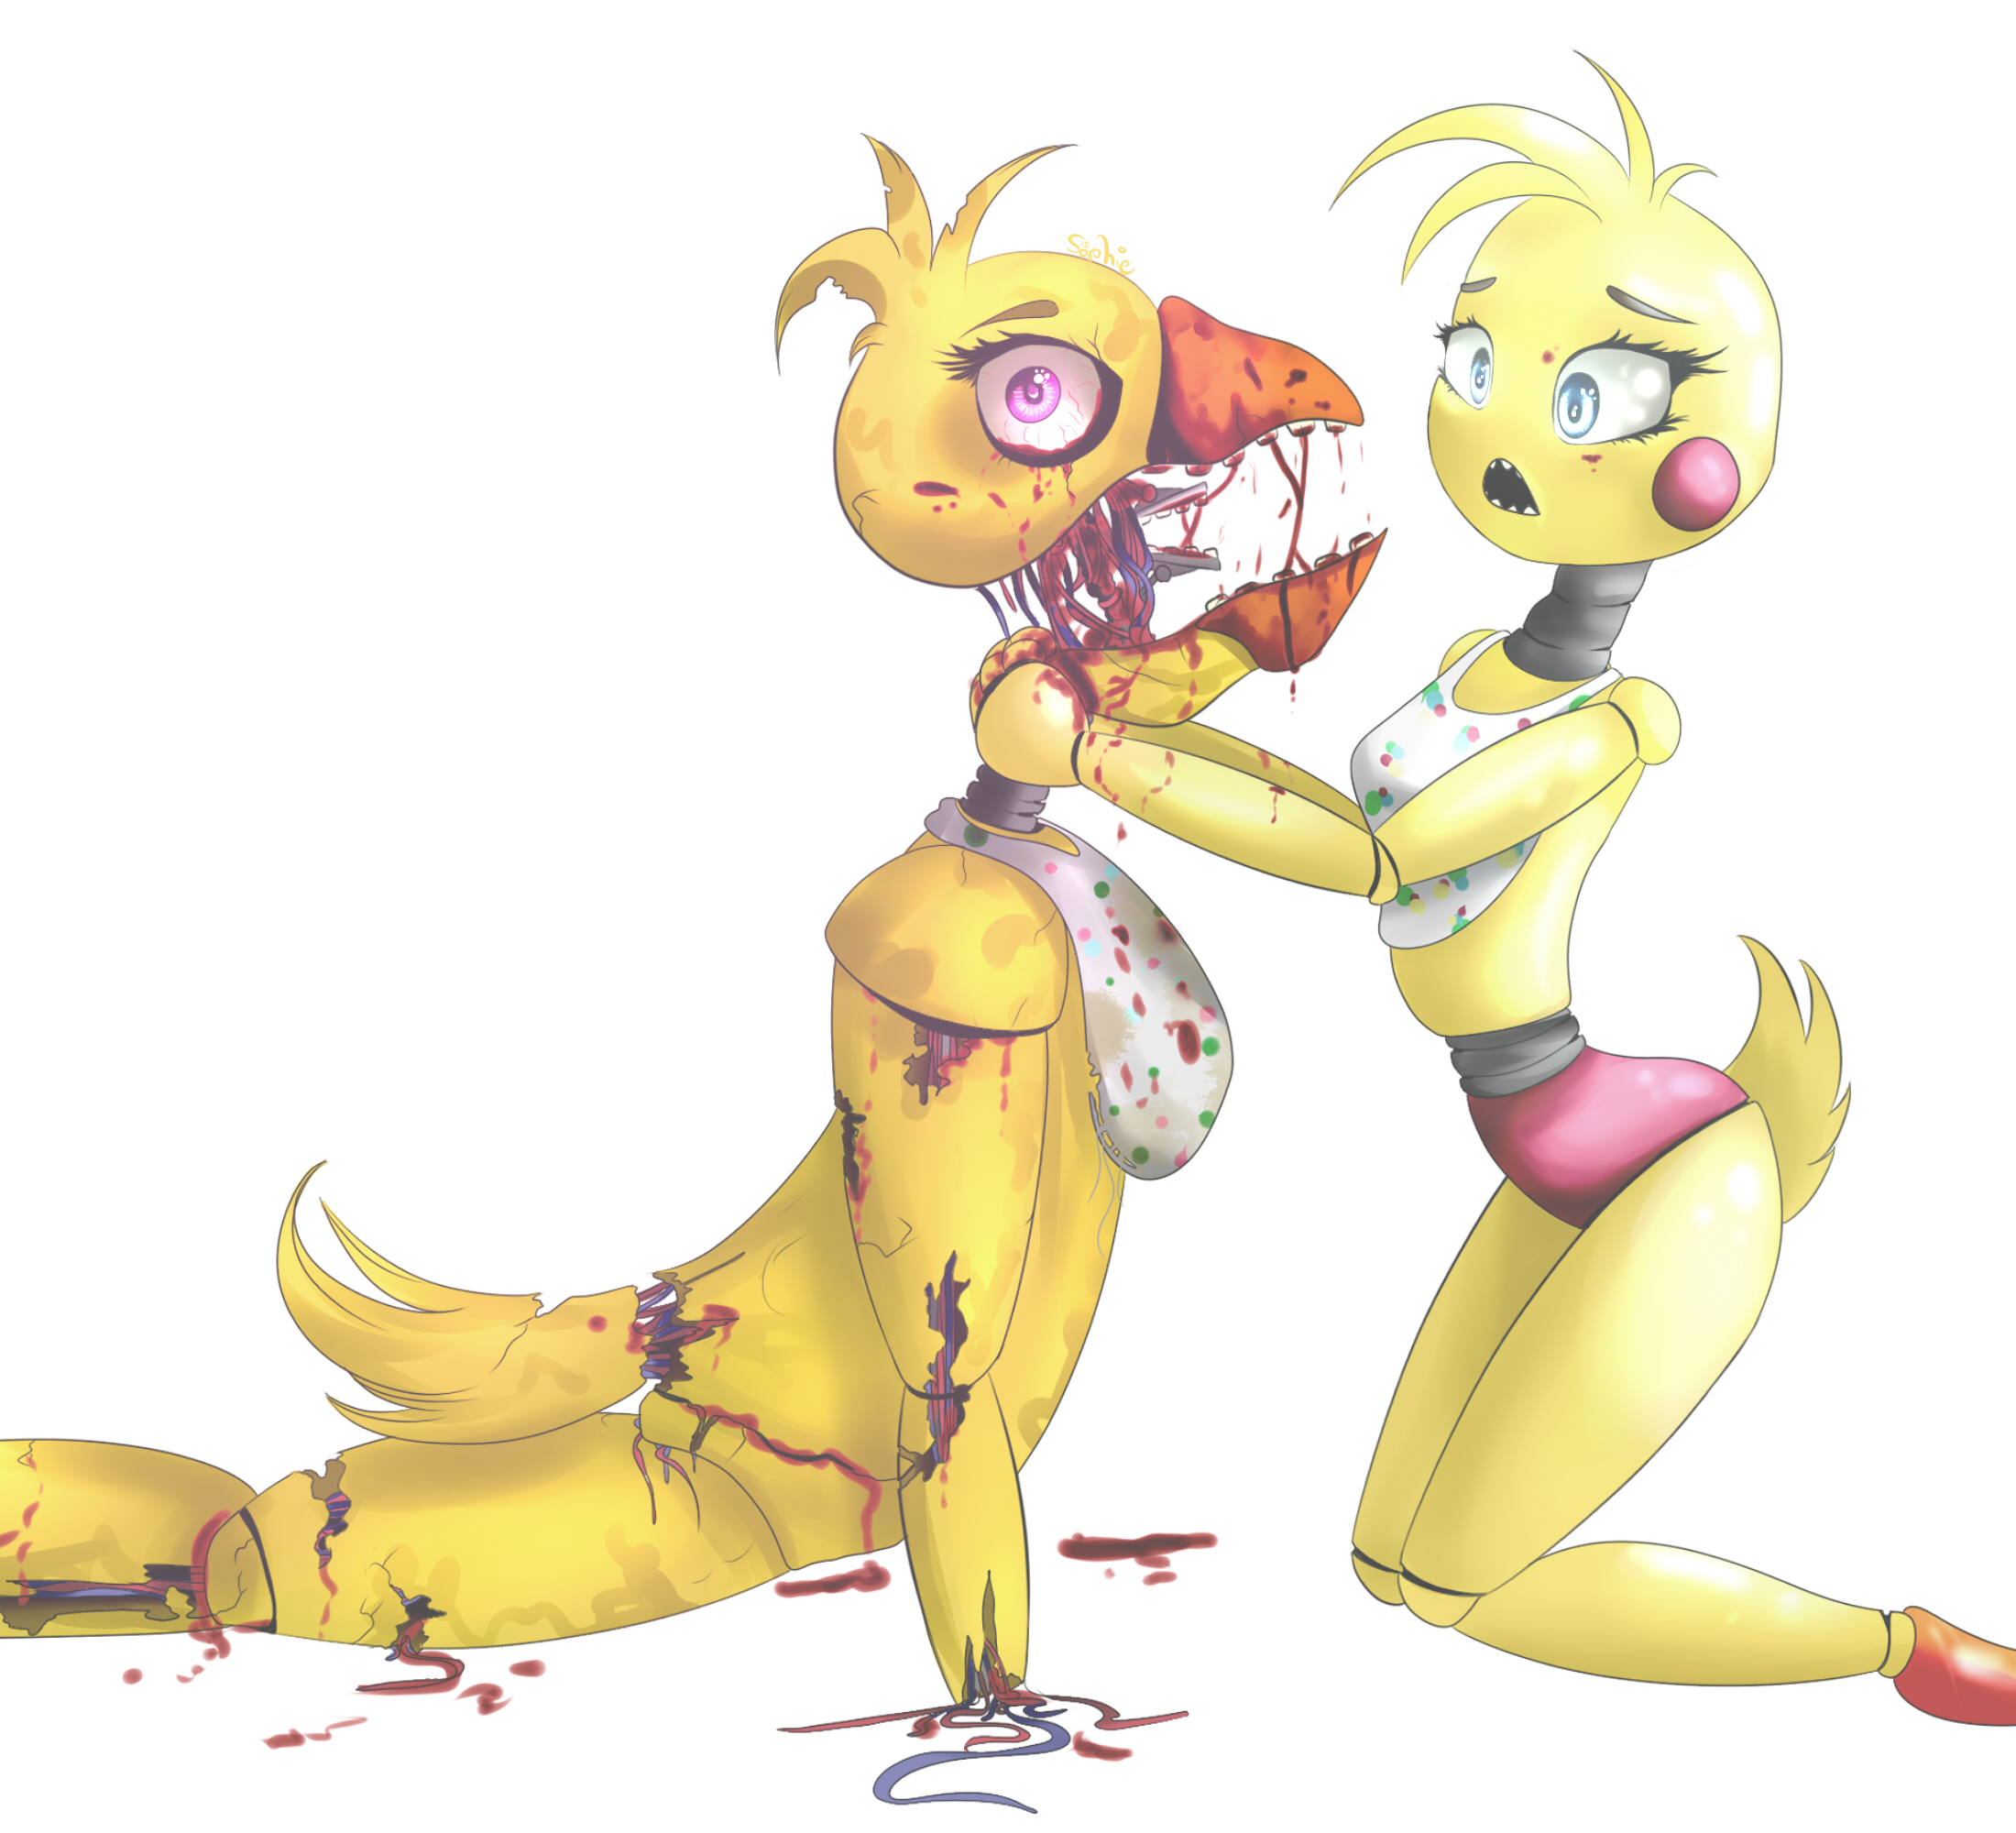 Withered Chica is fab 😏 image by @unkowniakqmak.